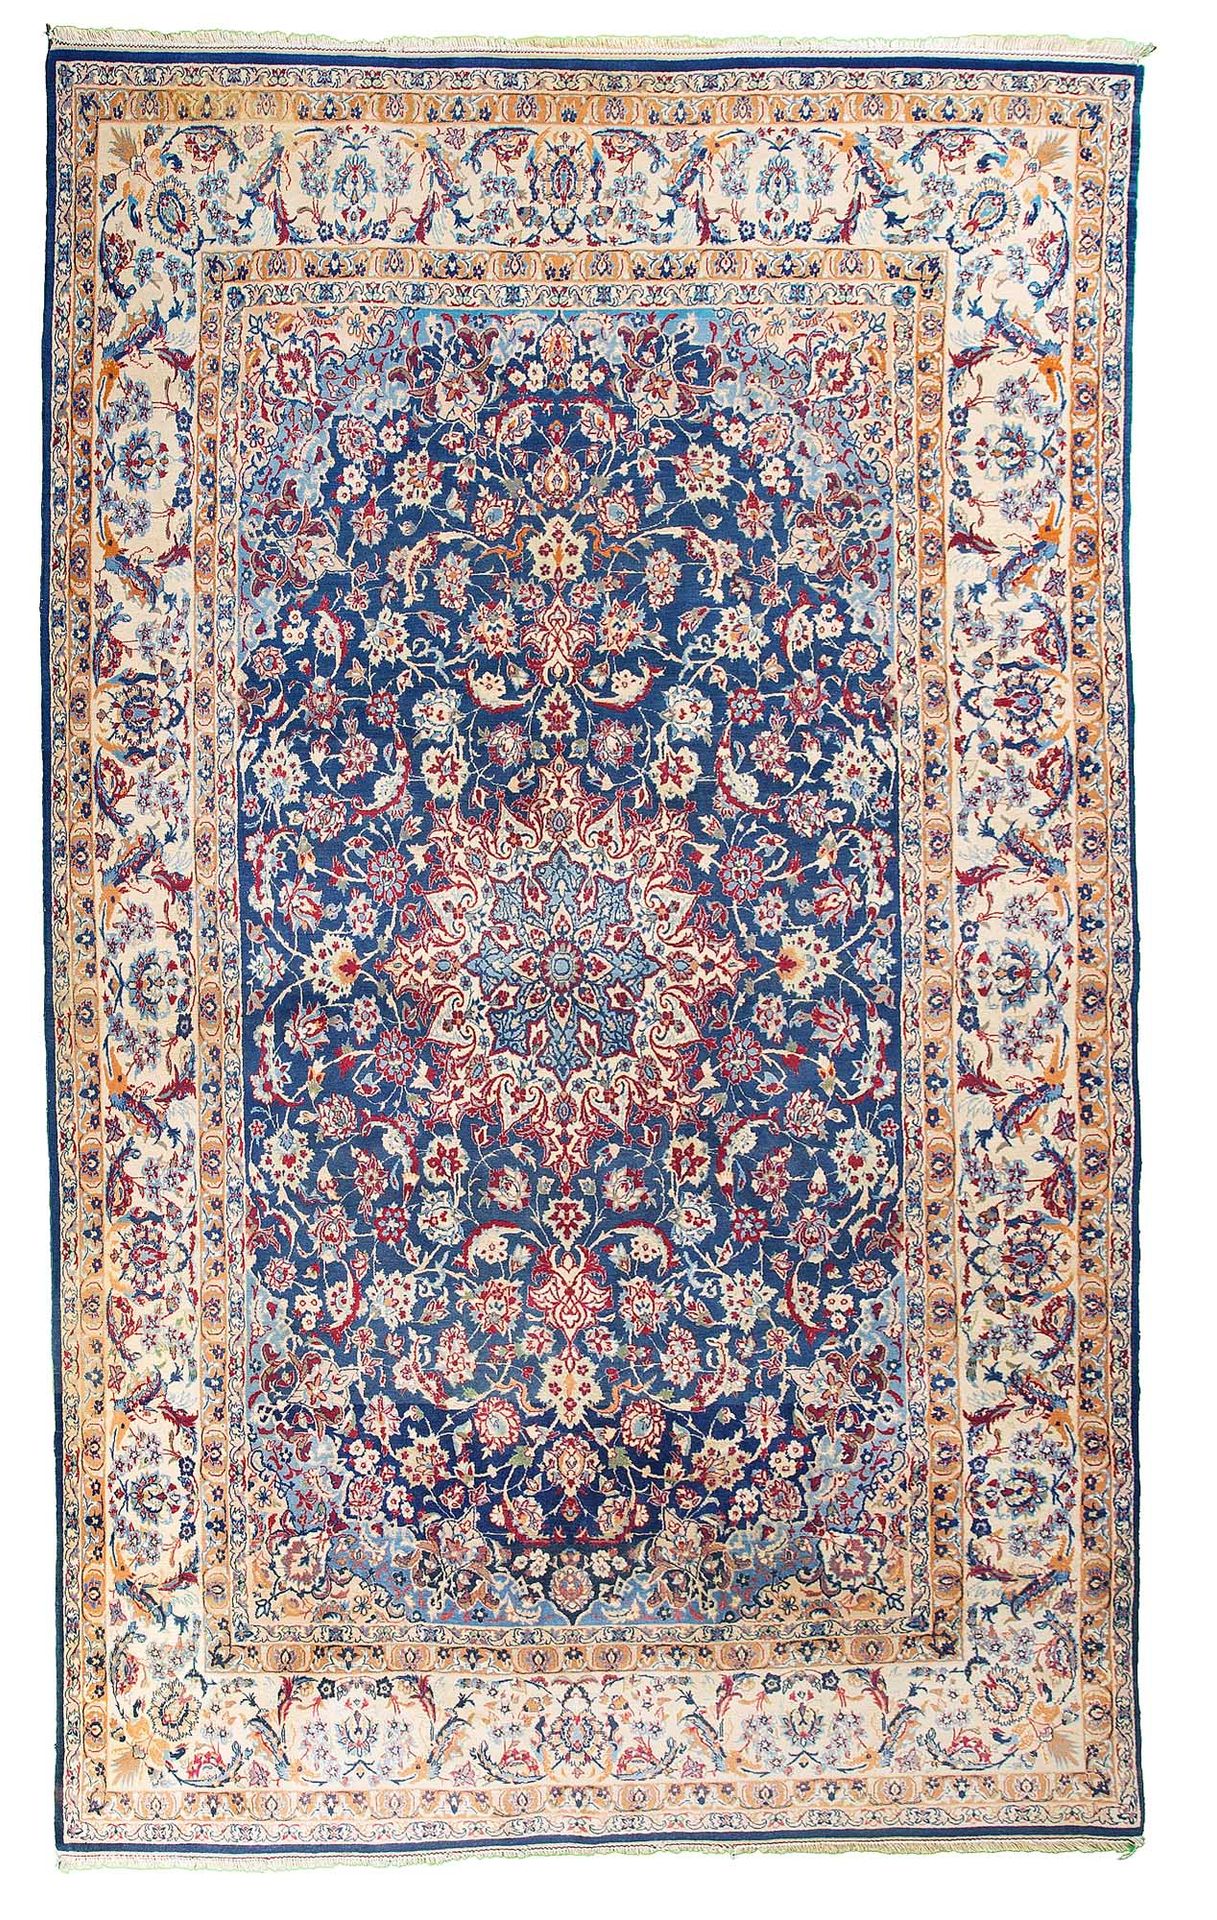 Null ISPAHAN carpet woven on silk warps and wefts (Iran), mid 20th century

Dime&hellip;